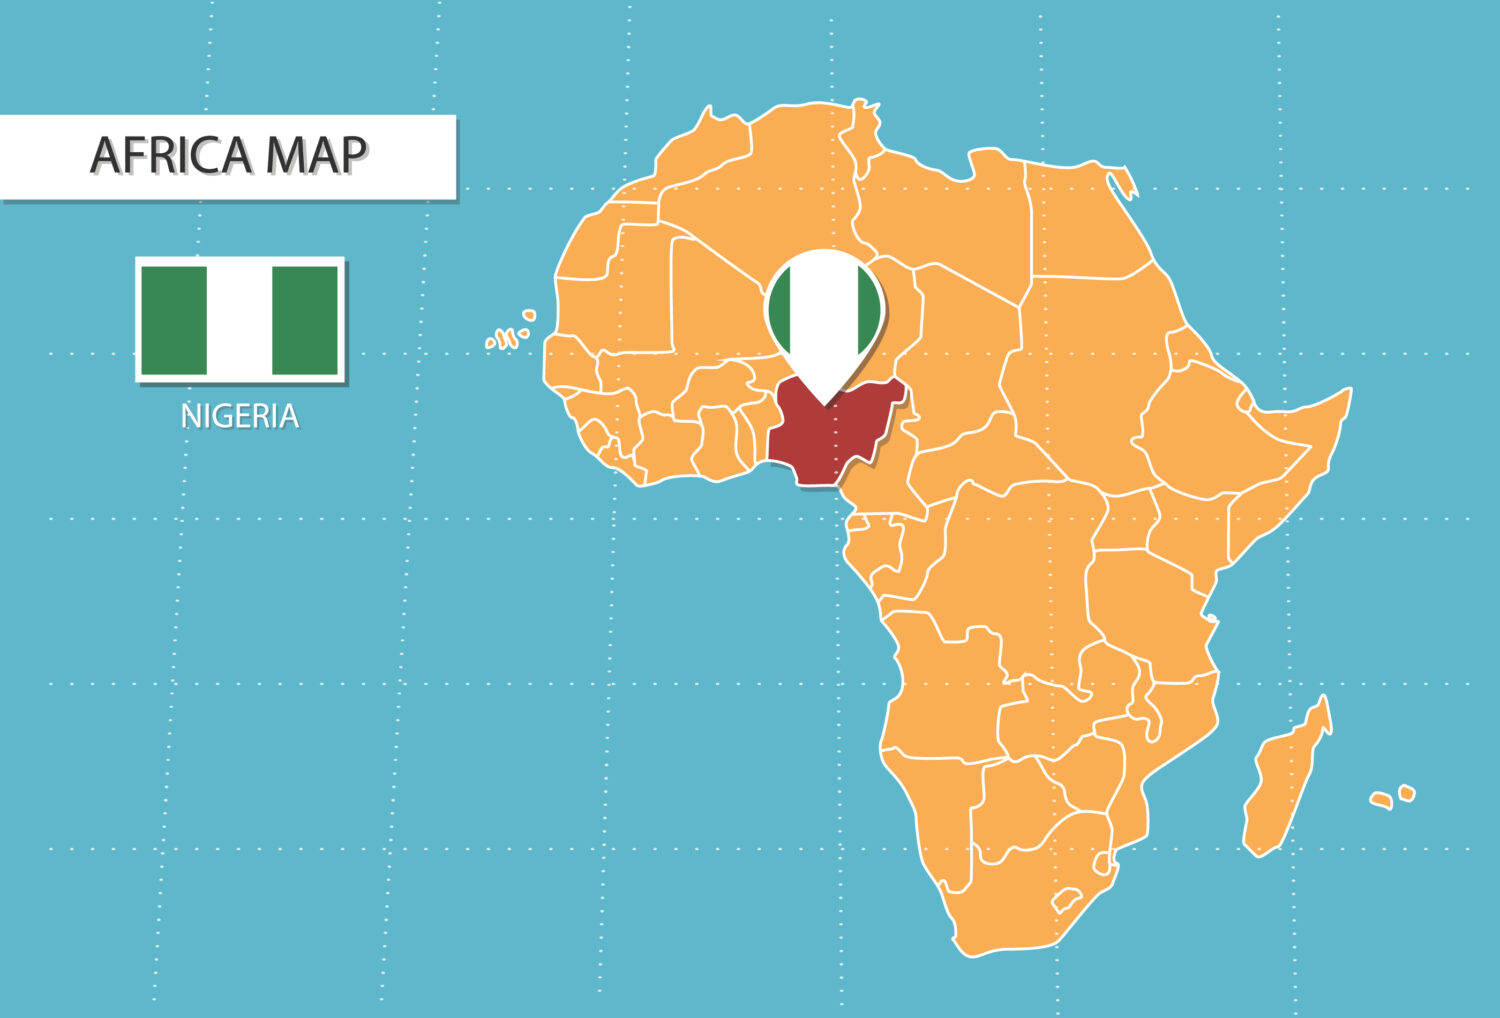 Nigeria on a map of Africa